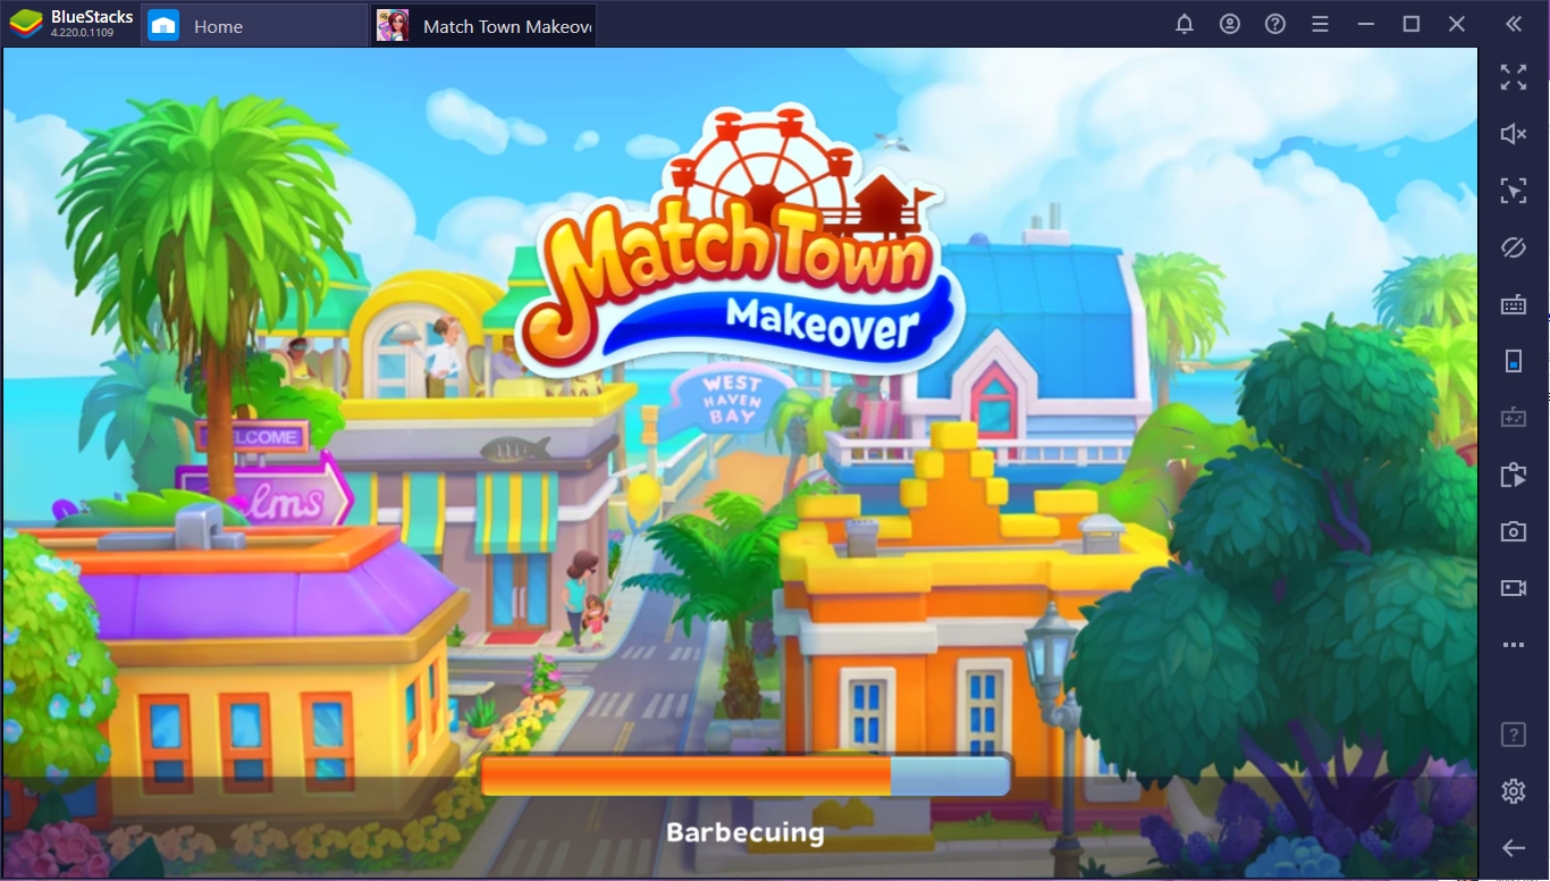 Play Match Town Makeover on PC with BlueStacks